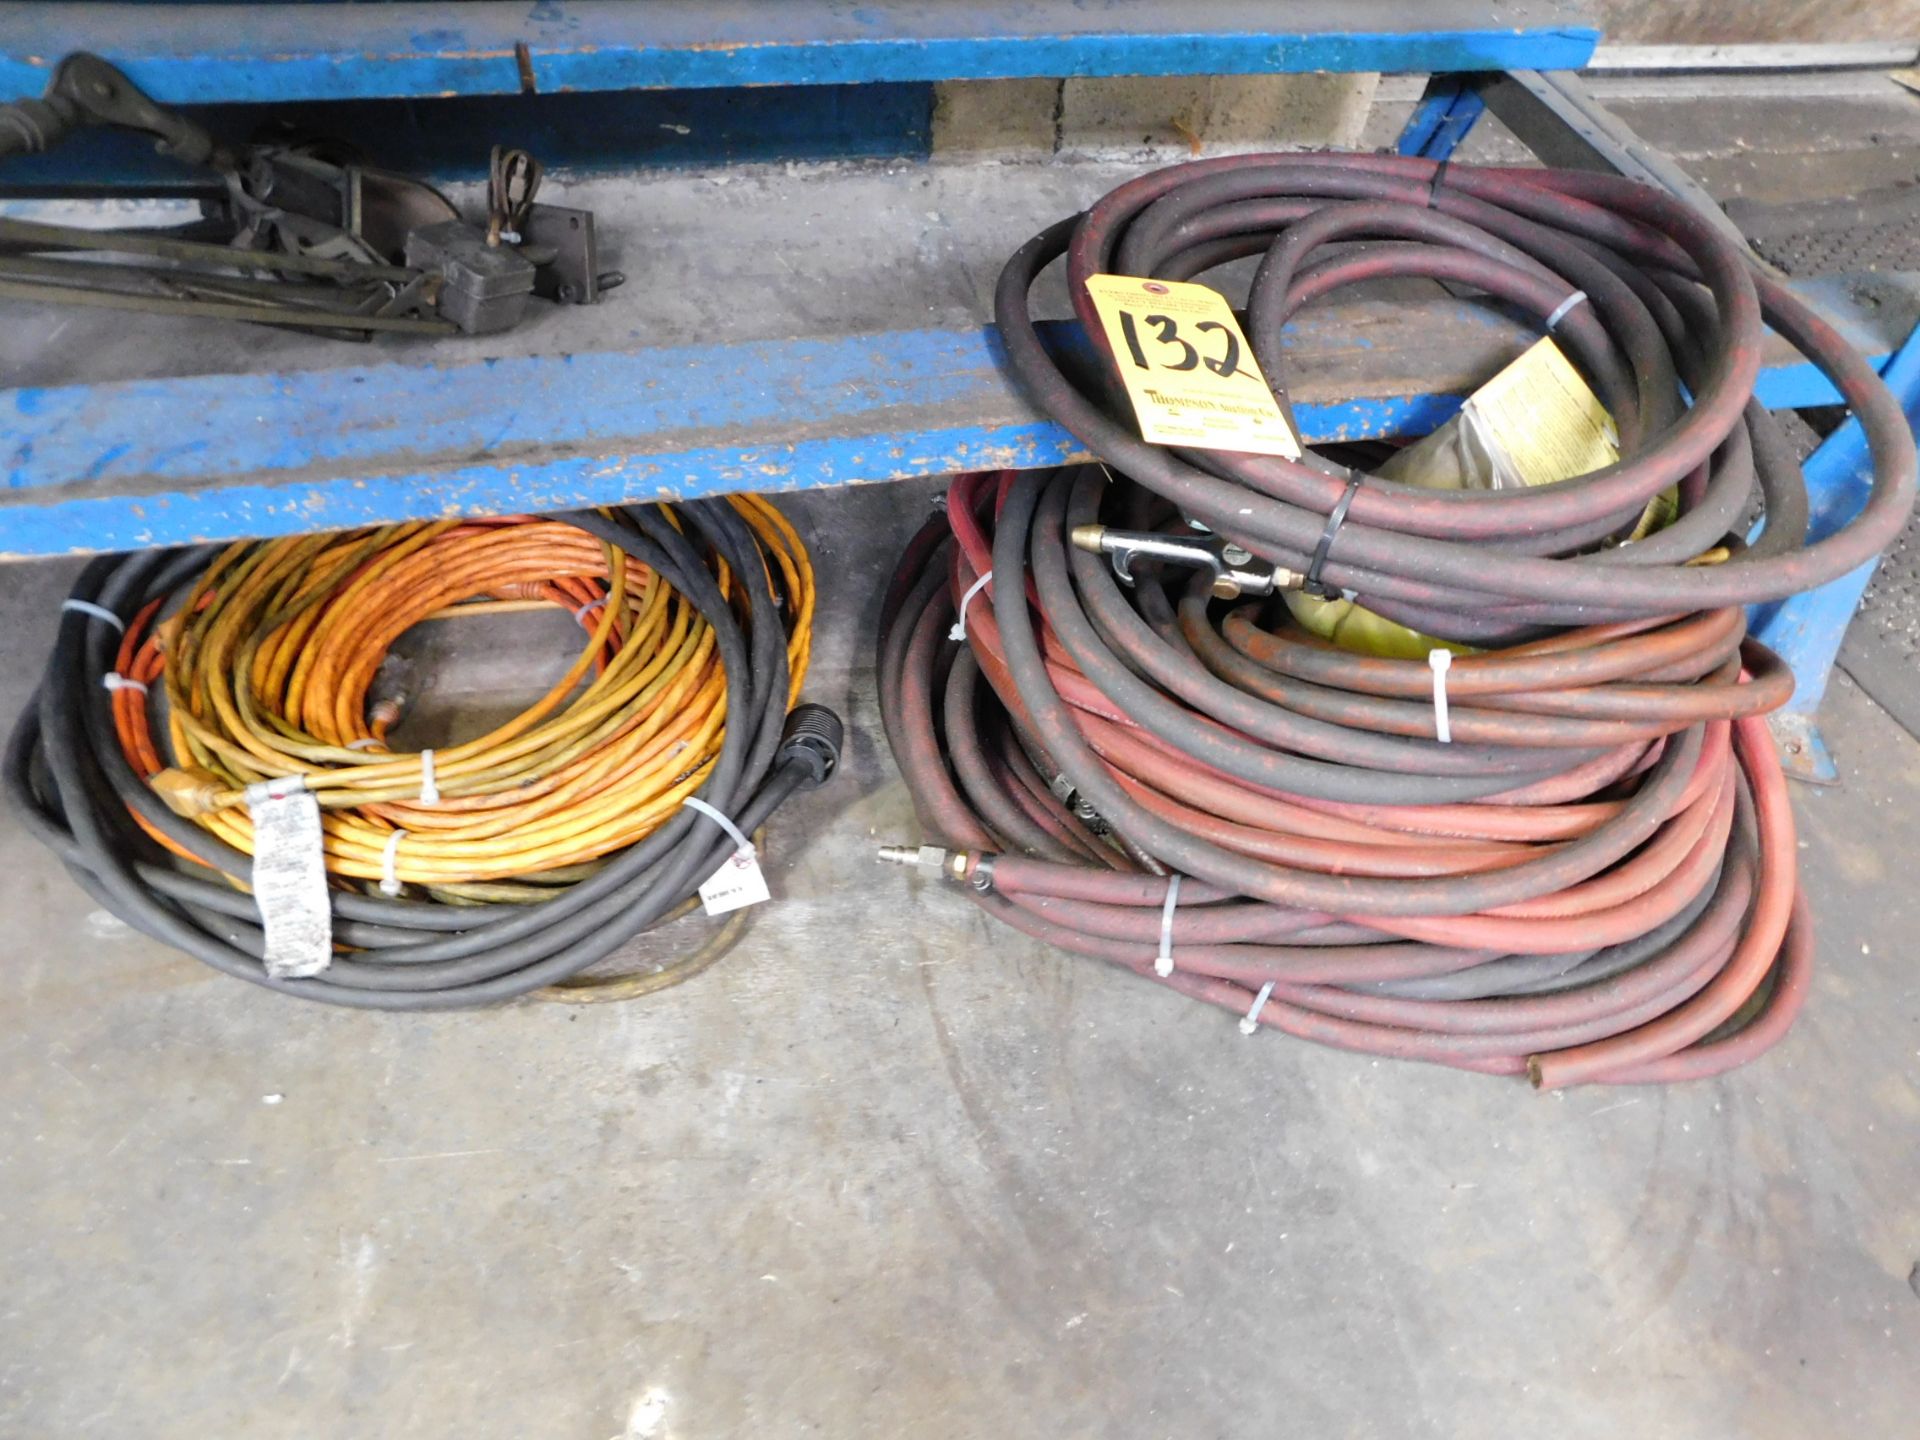 Air Hose, Extension Cords, and Work Lights